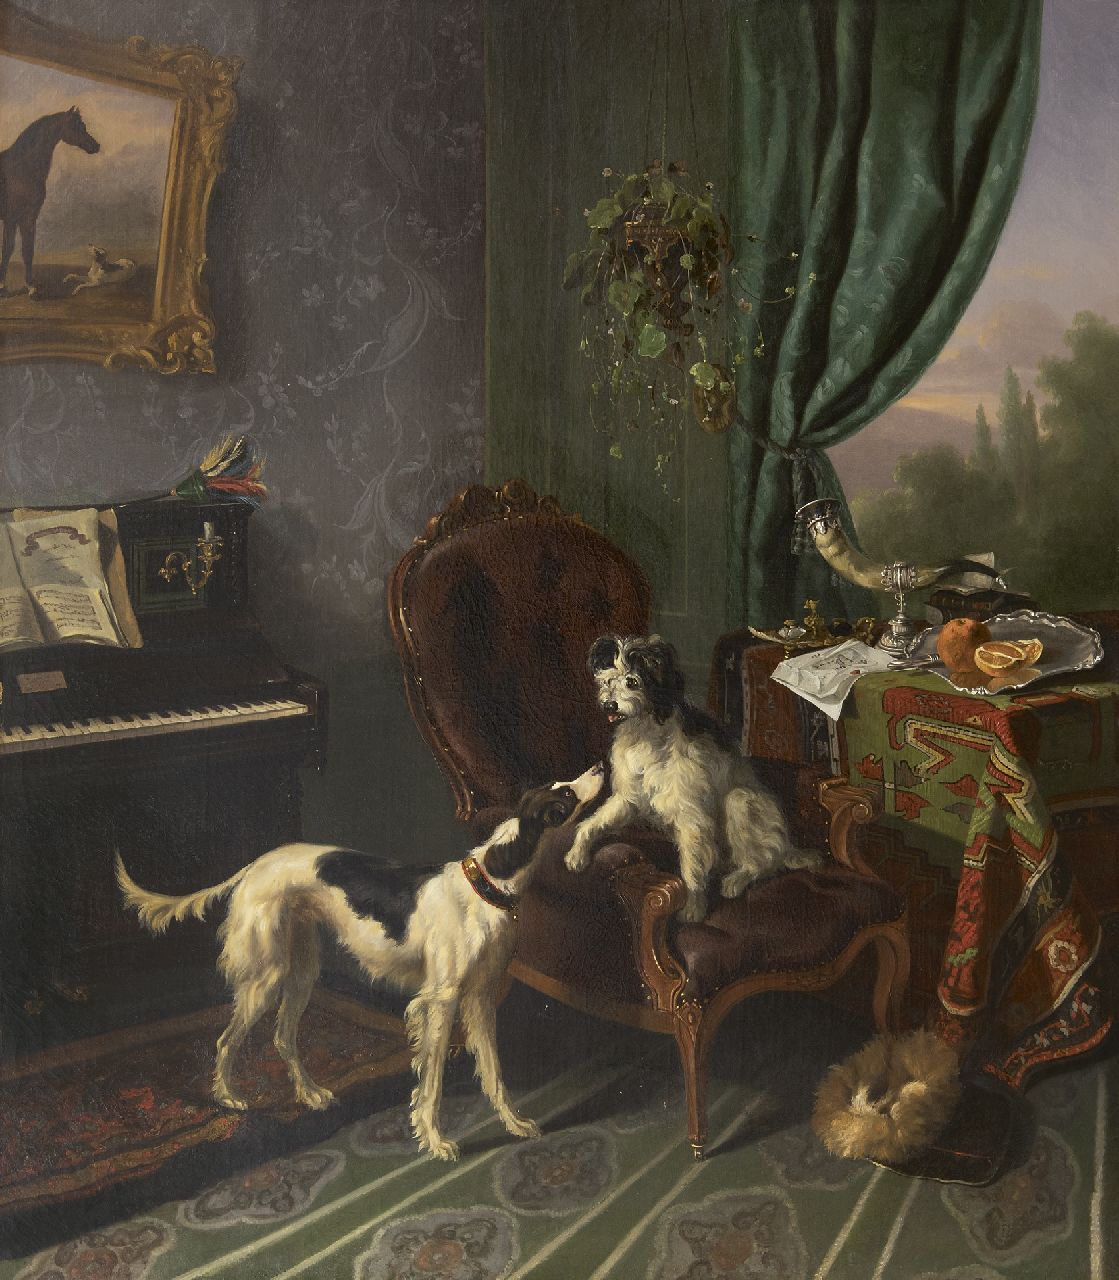 Verschuur W.  | Wouterus Verschuur | Paintings offered for sale | Dogs in the music room, oil on canvas 90.0 x 79.0 cm, painted ca. 1848-1850